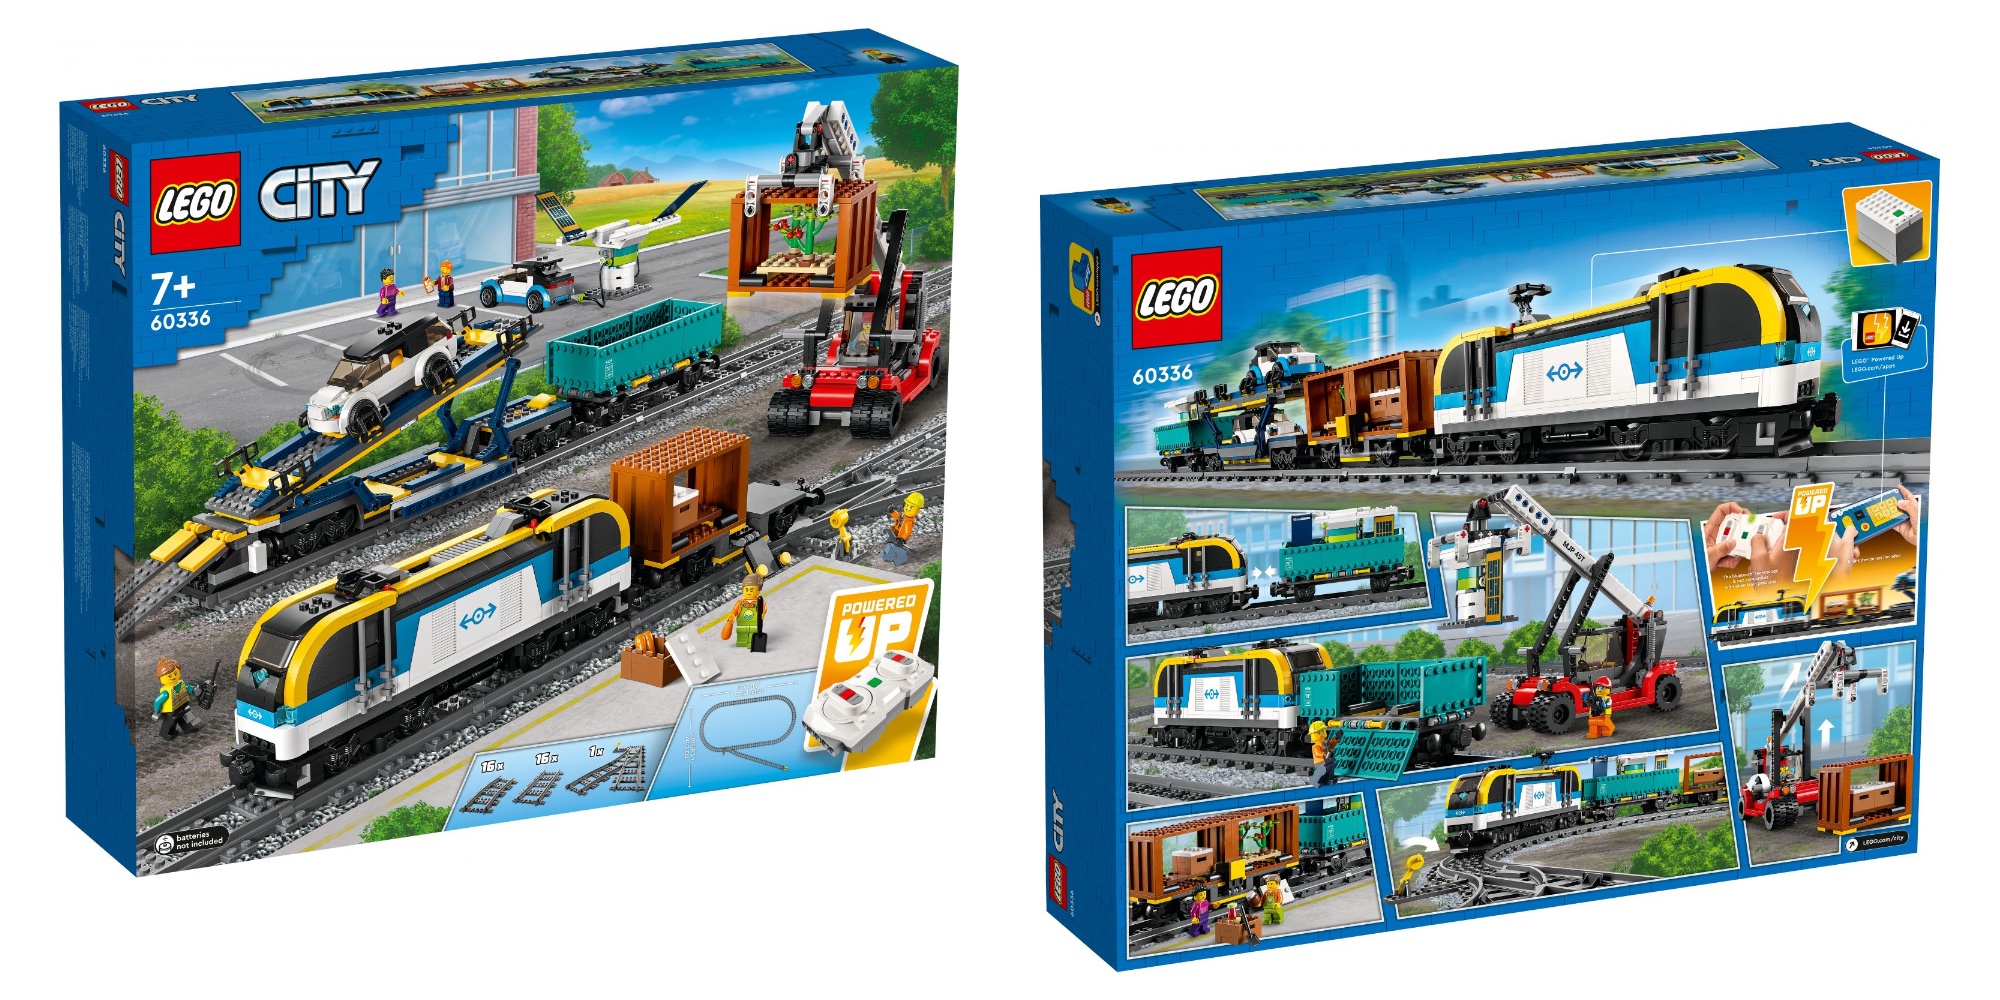 All LEGO City Summer 2022 Sets Officially Revealed